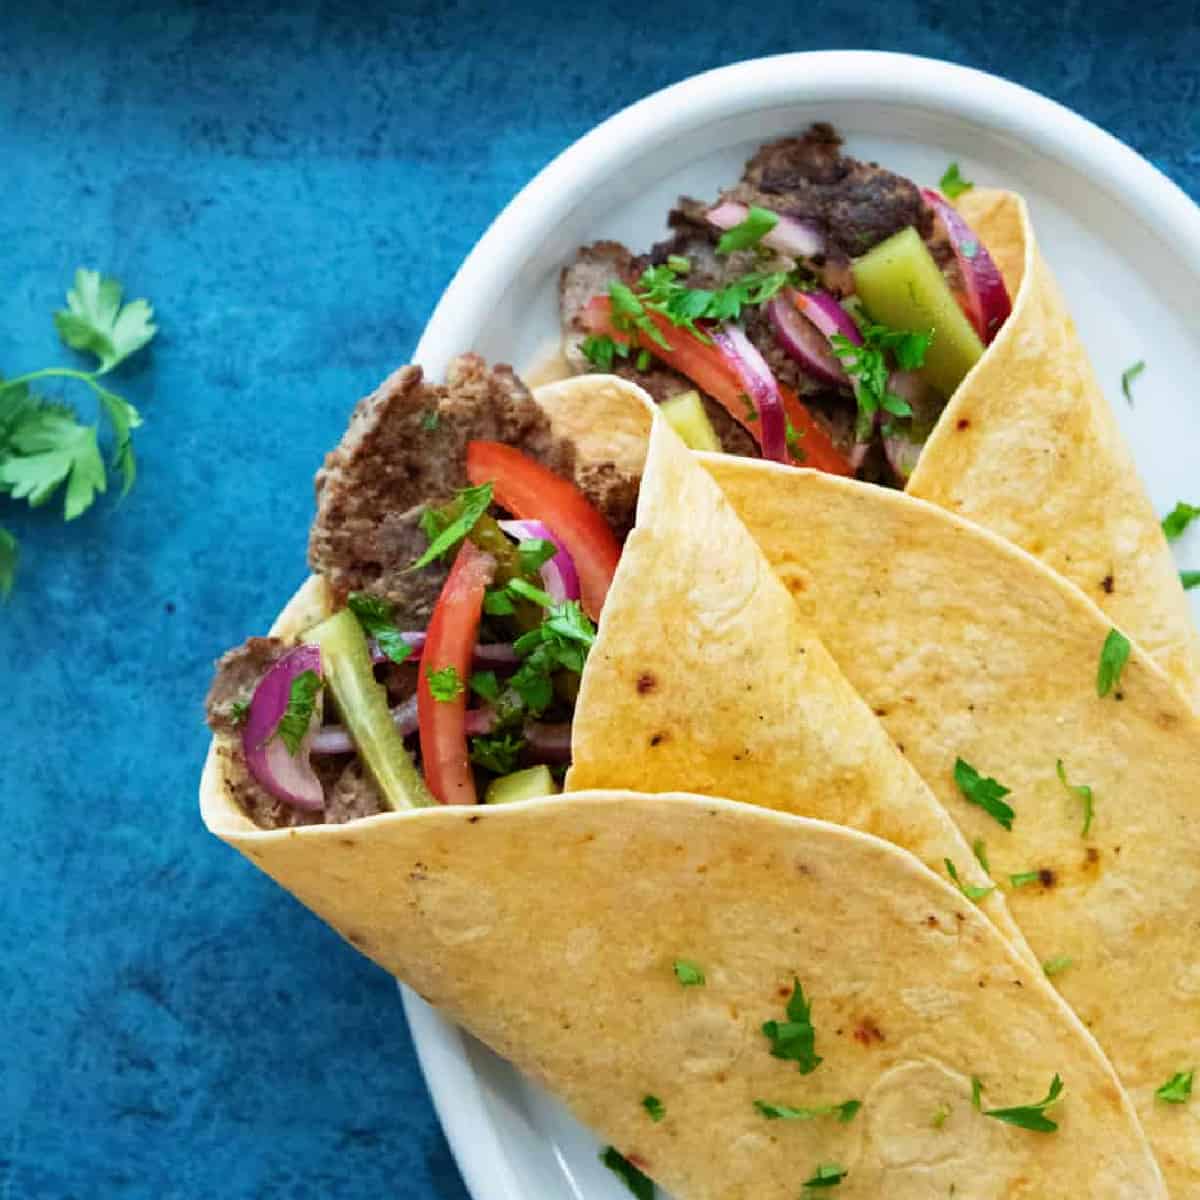 Doner kebab wraps made with lamb or beef. 